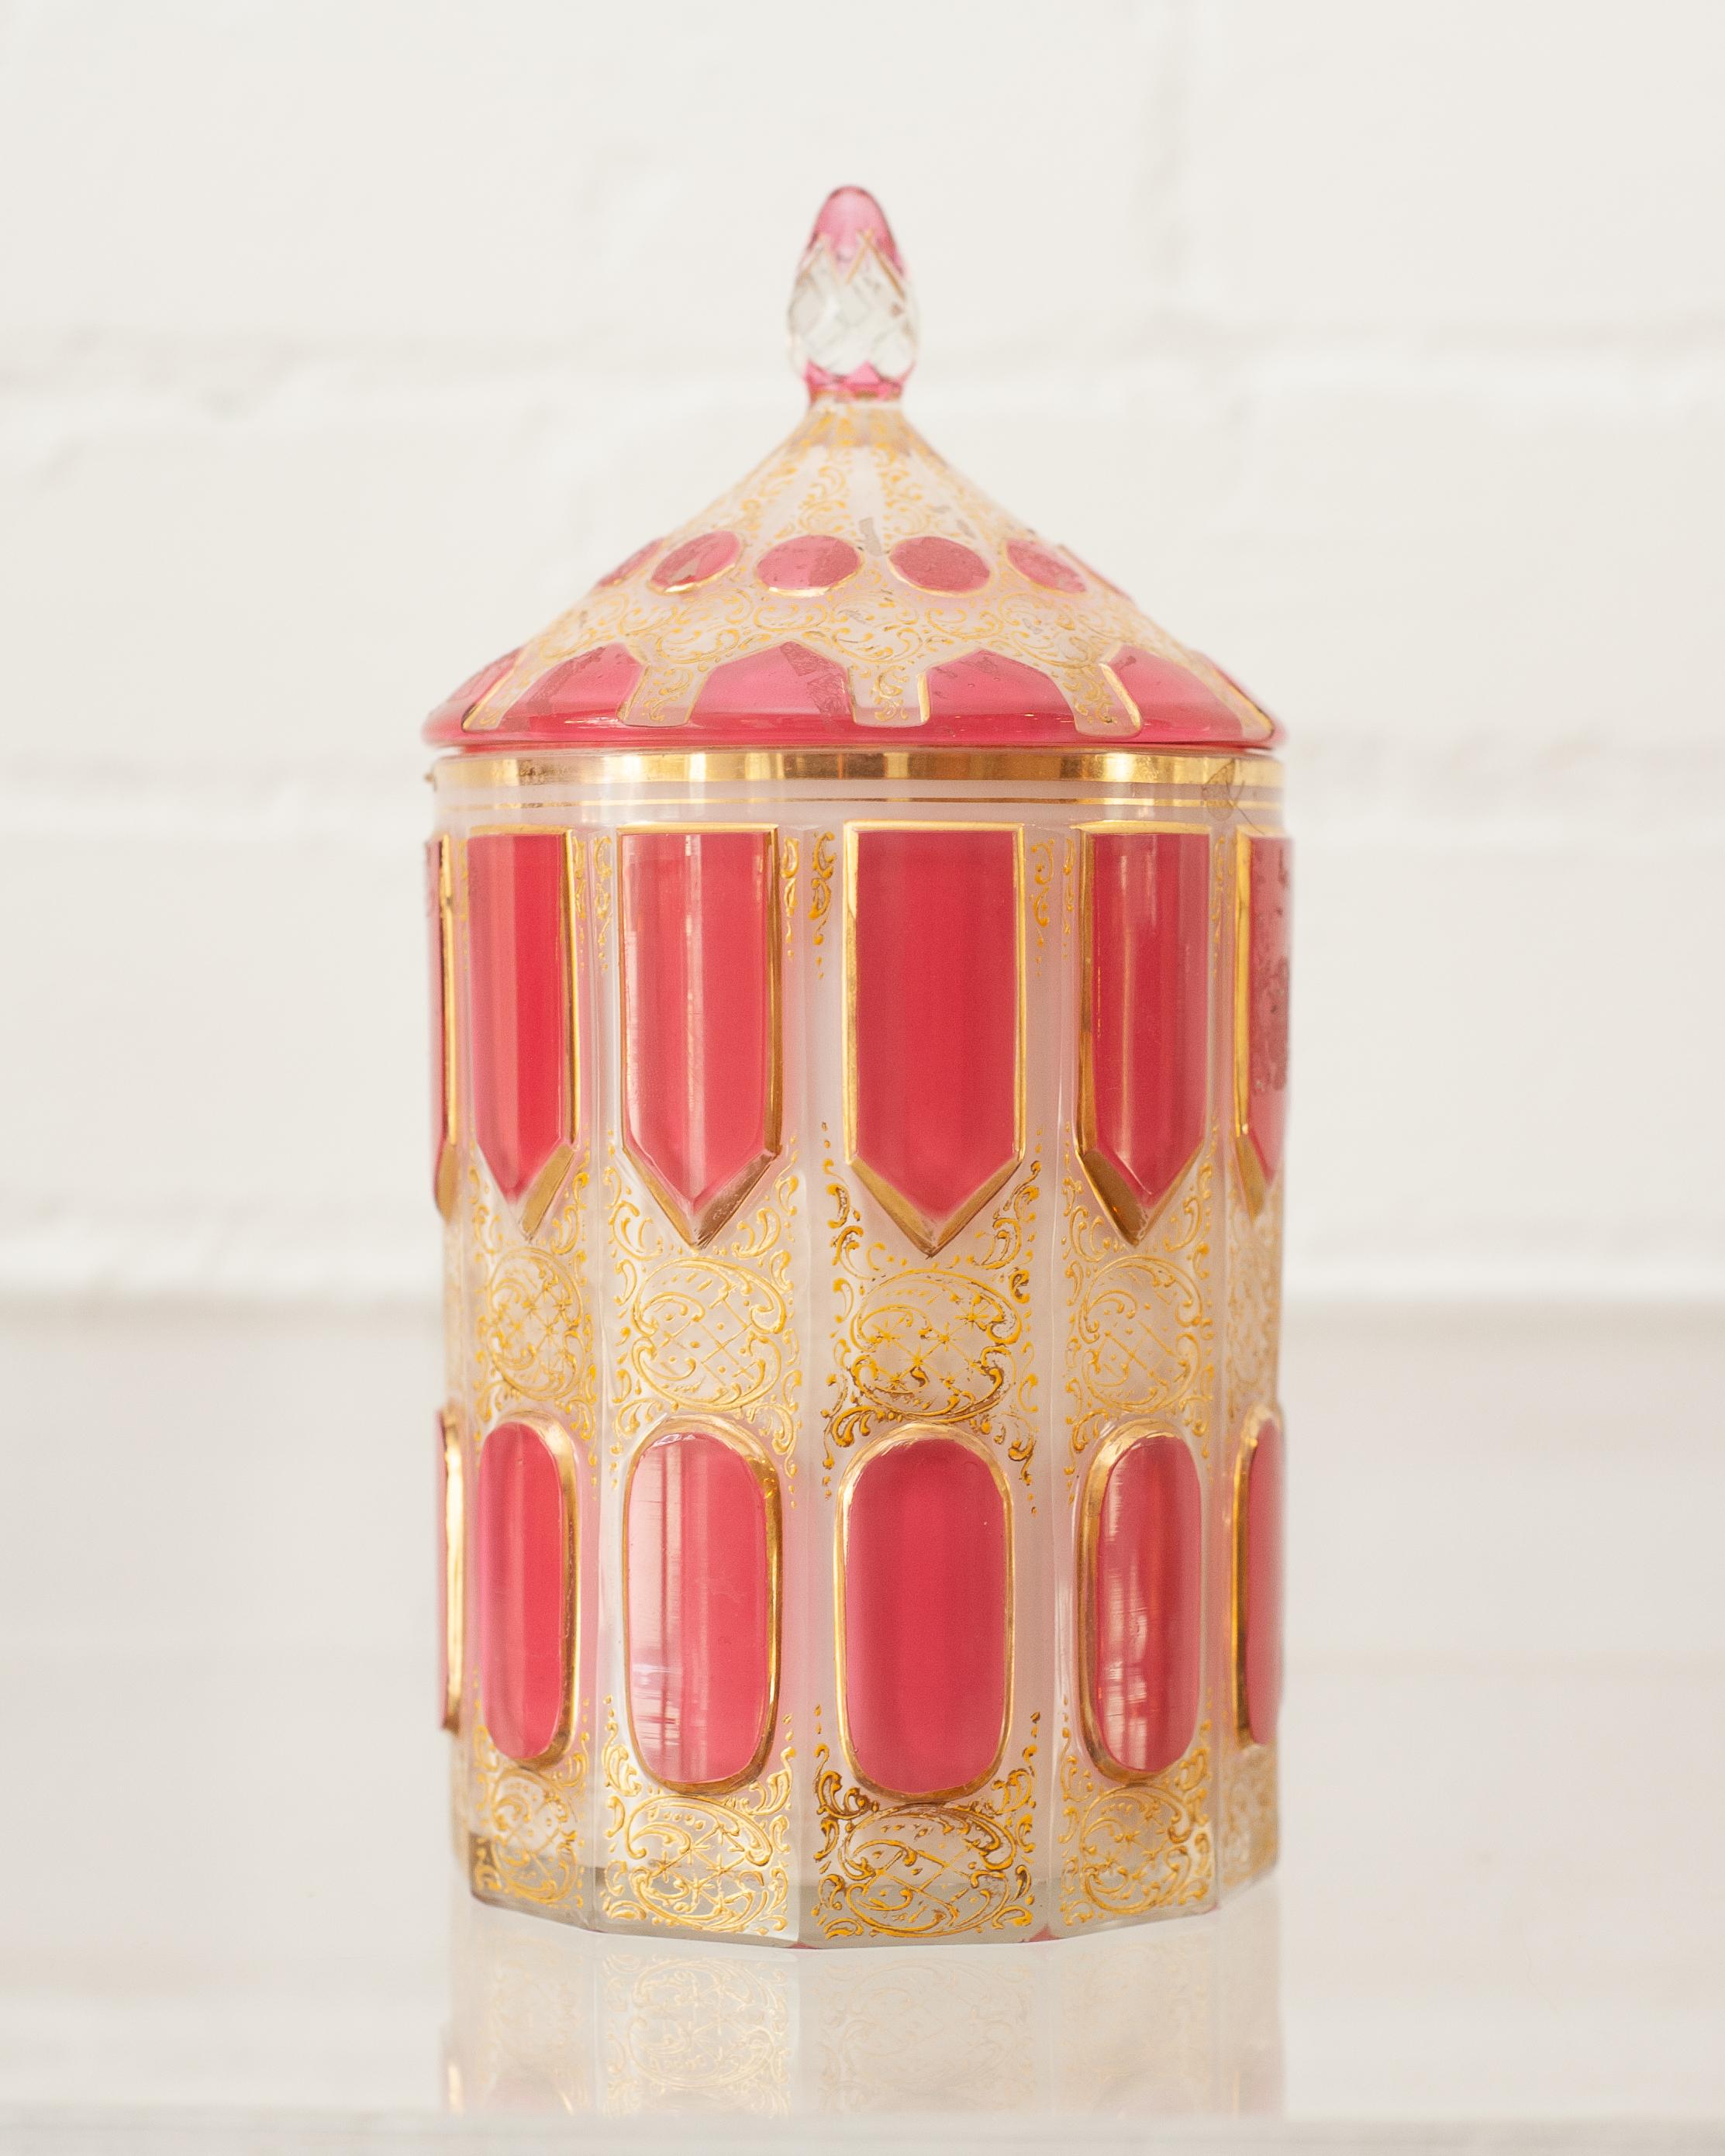 This stunning Art Deco Moser lidded canister has a milk glass octagonal form, with pink overlay glass cabochons, and gilded decorations surrounding the panels with ornate raised filigree. Broad gilded band where canister and lid meet.